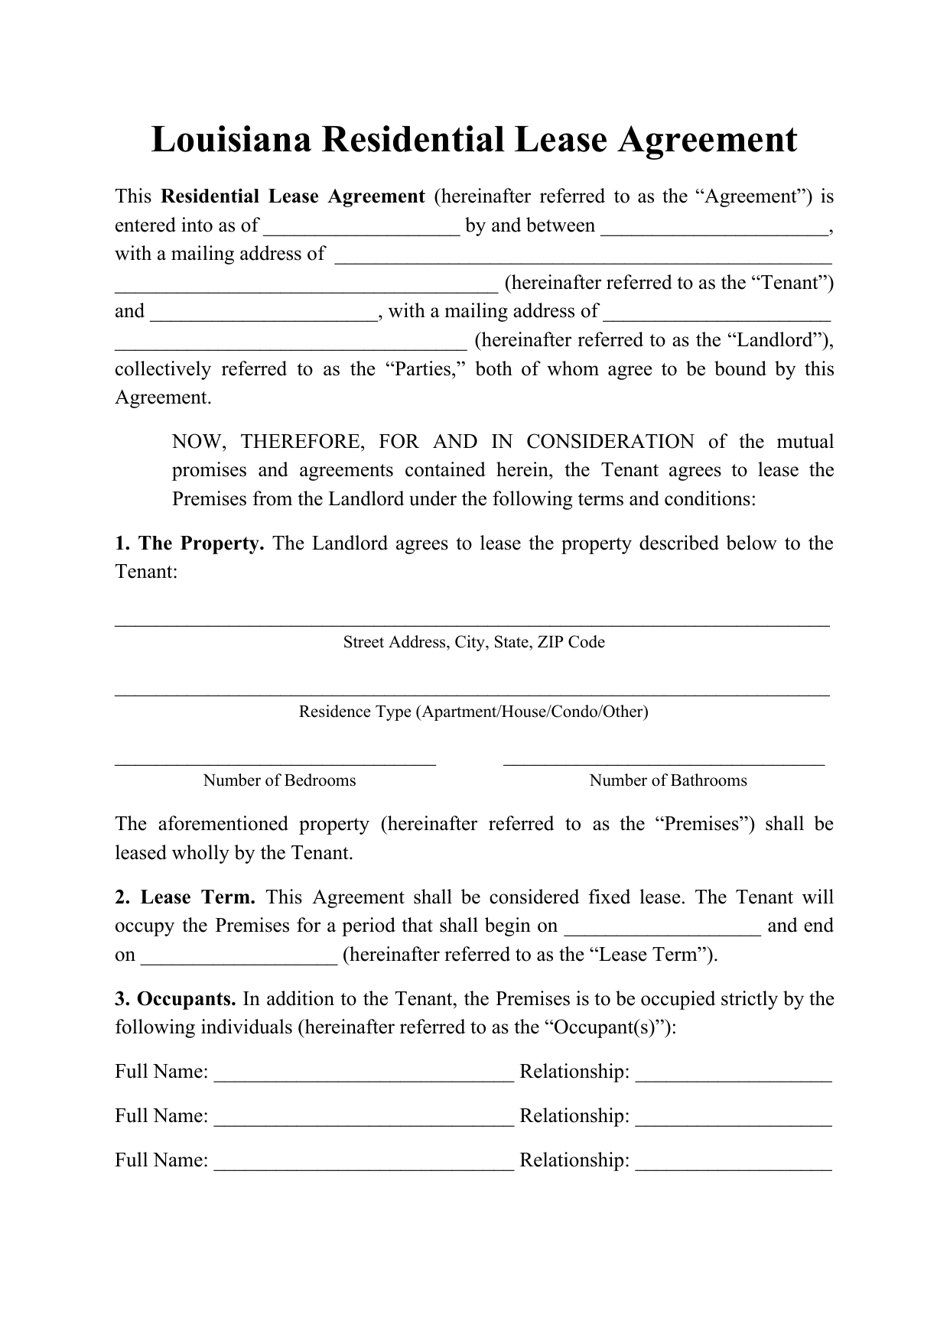 Louisiana Residential Lease Agreement Template Fill Out Sign Online And Download PDF